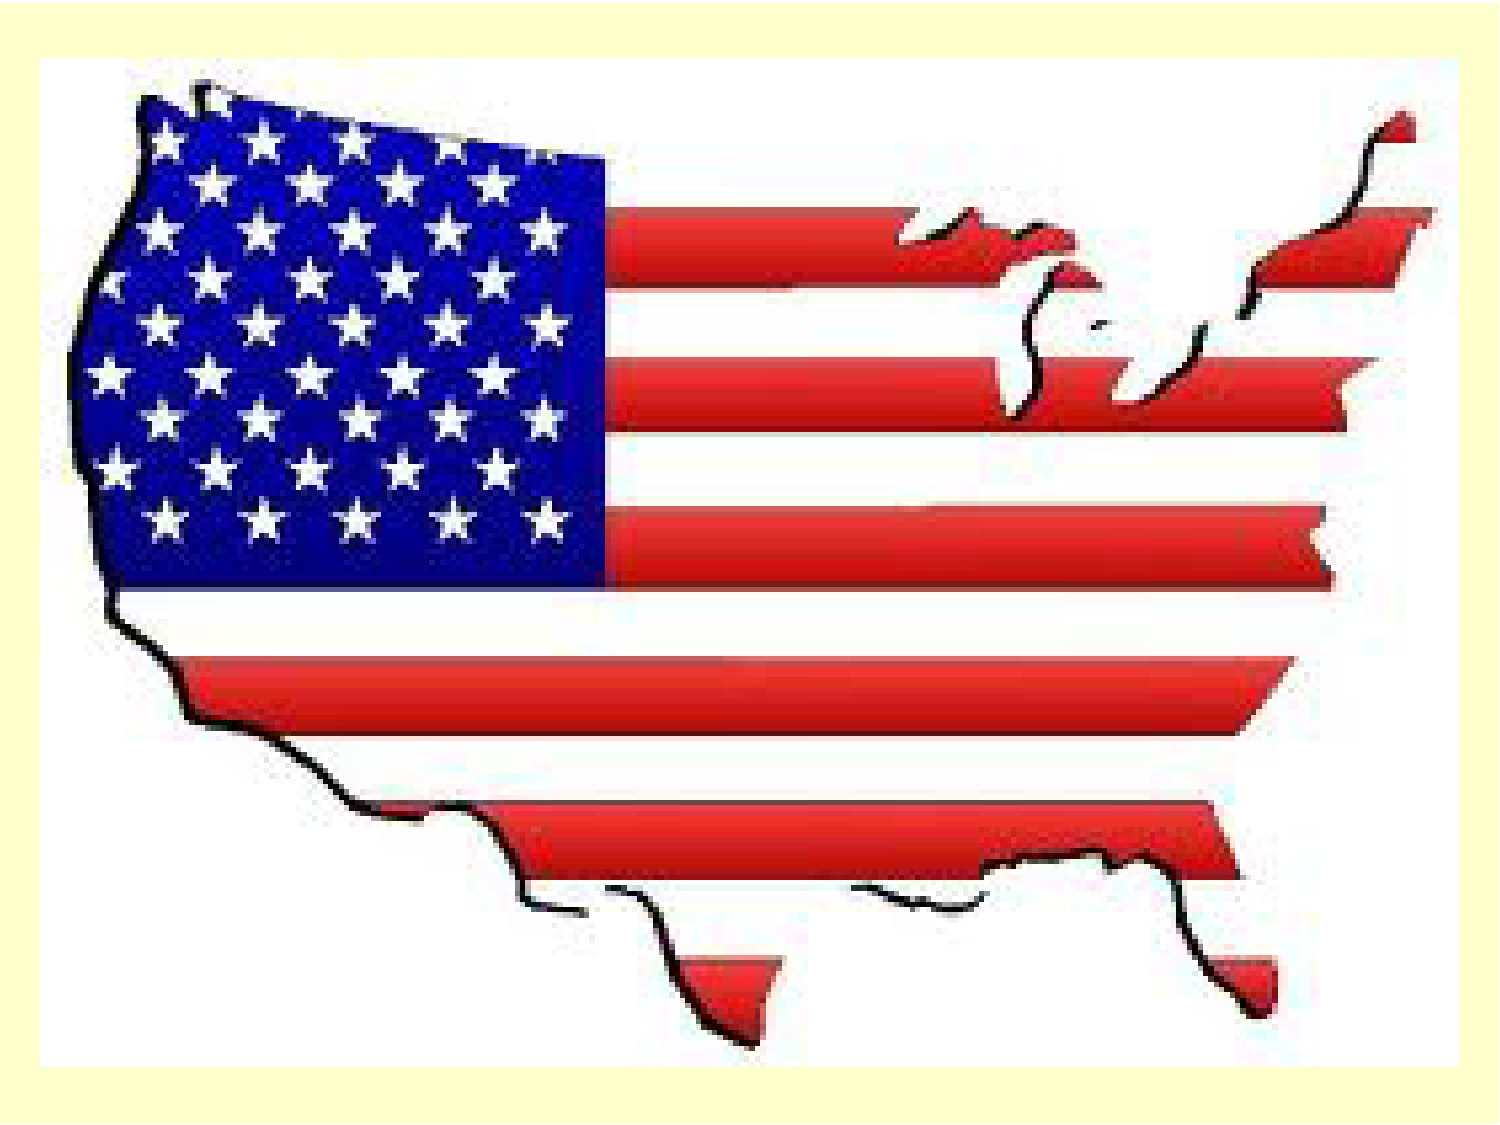 Clipart of united states map